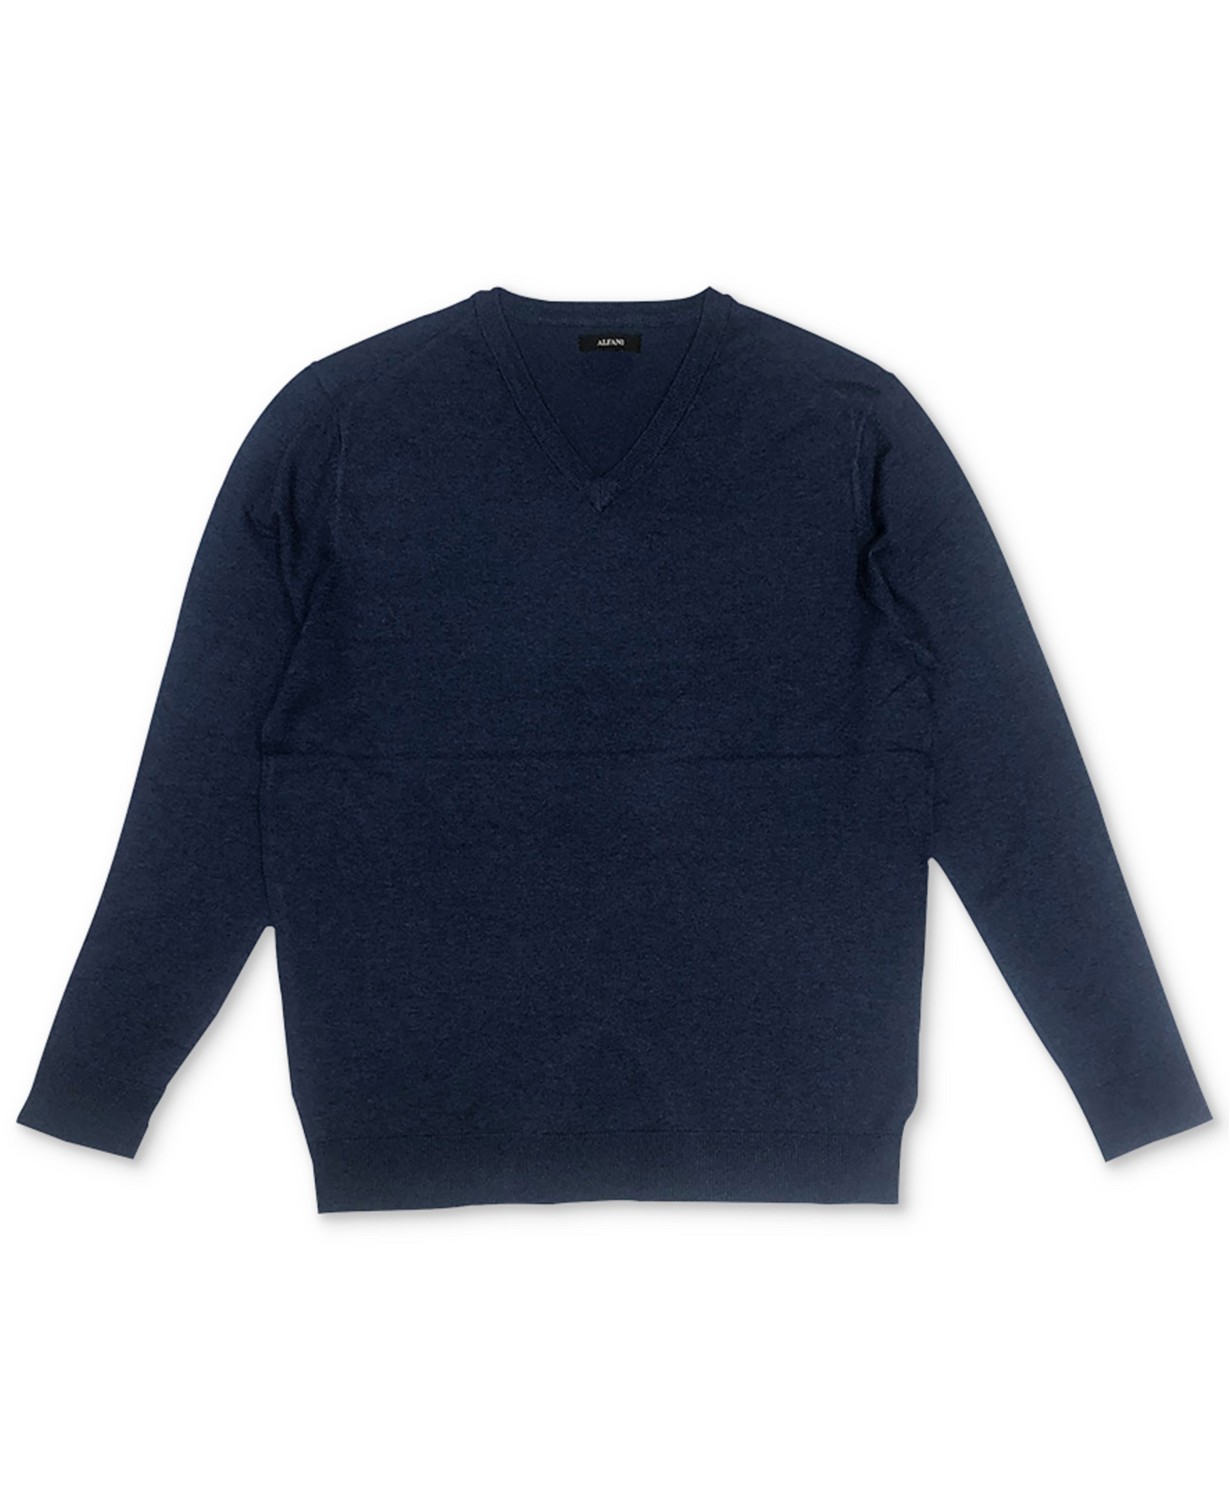 www.couturepoint.com-alfani-mens-blue-solid-v-neck-long-sleeves-sweater